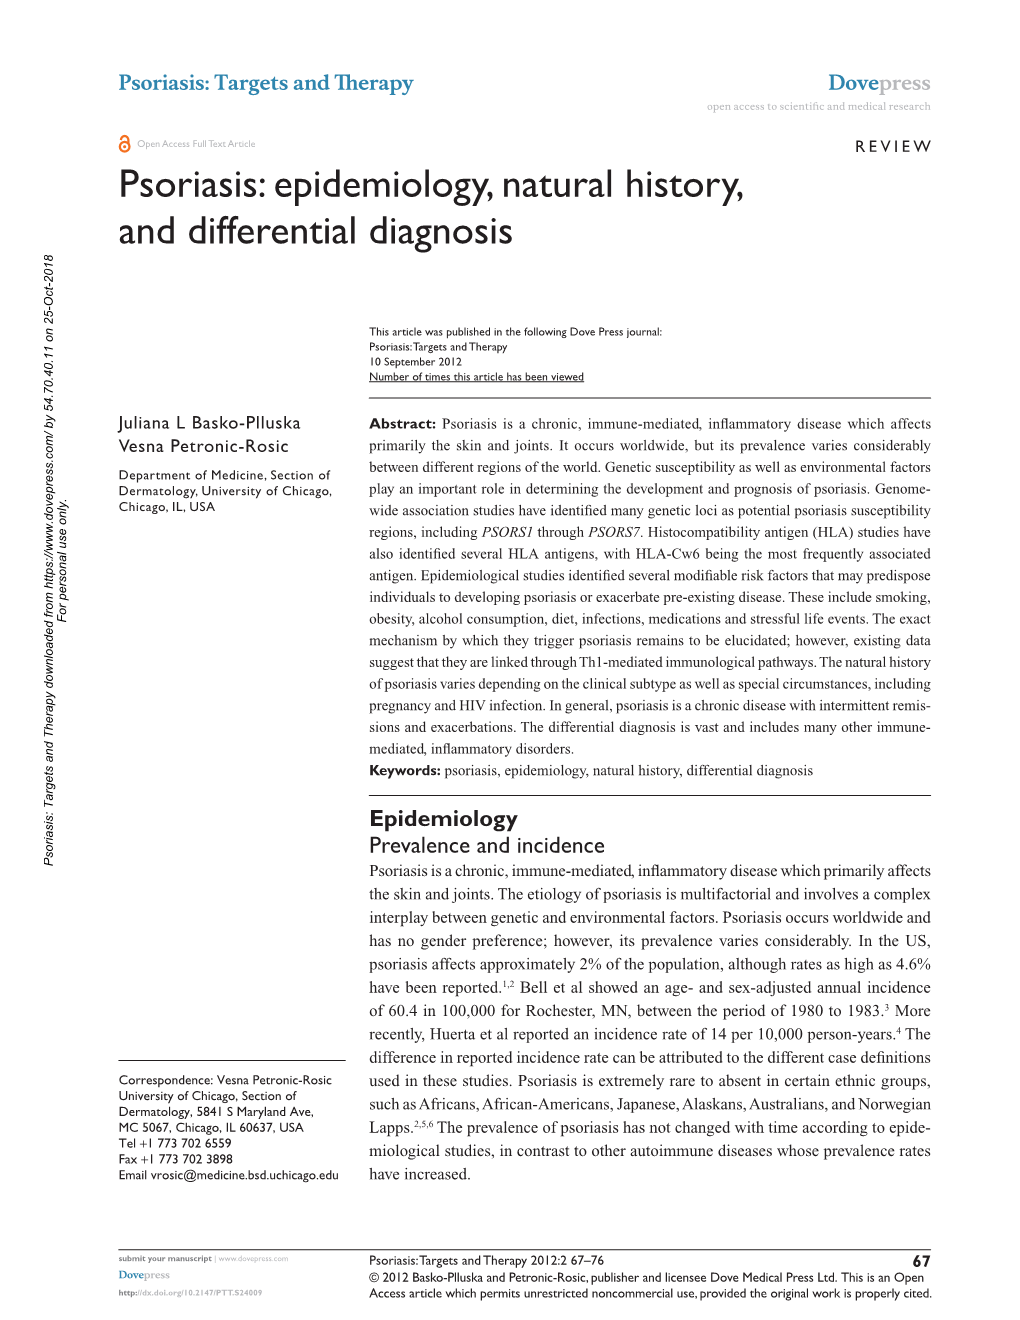 Psoriasis: Epidemiology, Natural History, and Differential Diagnosis